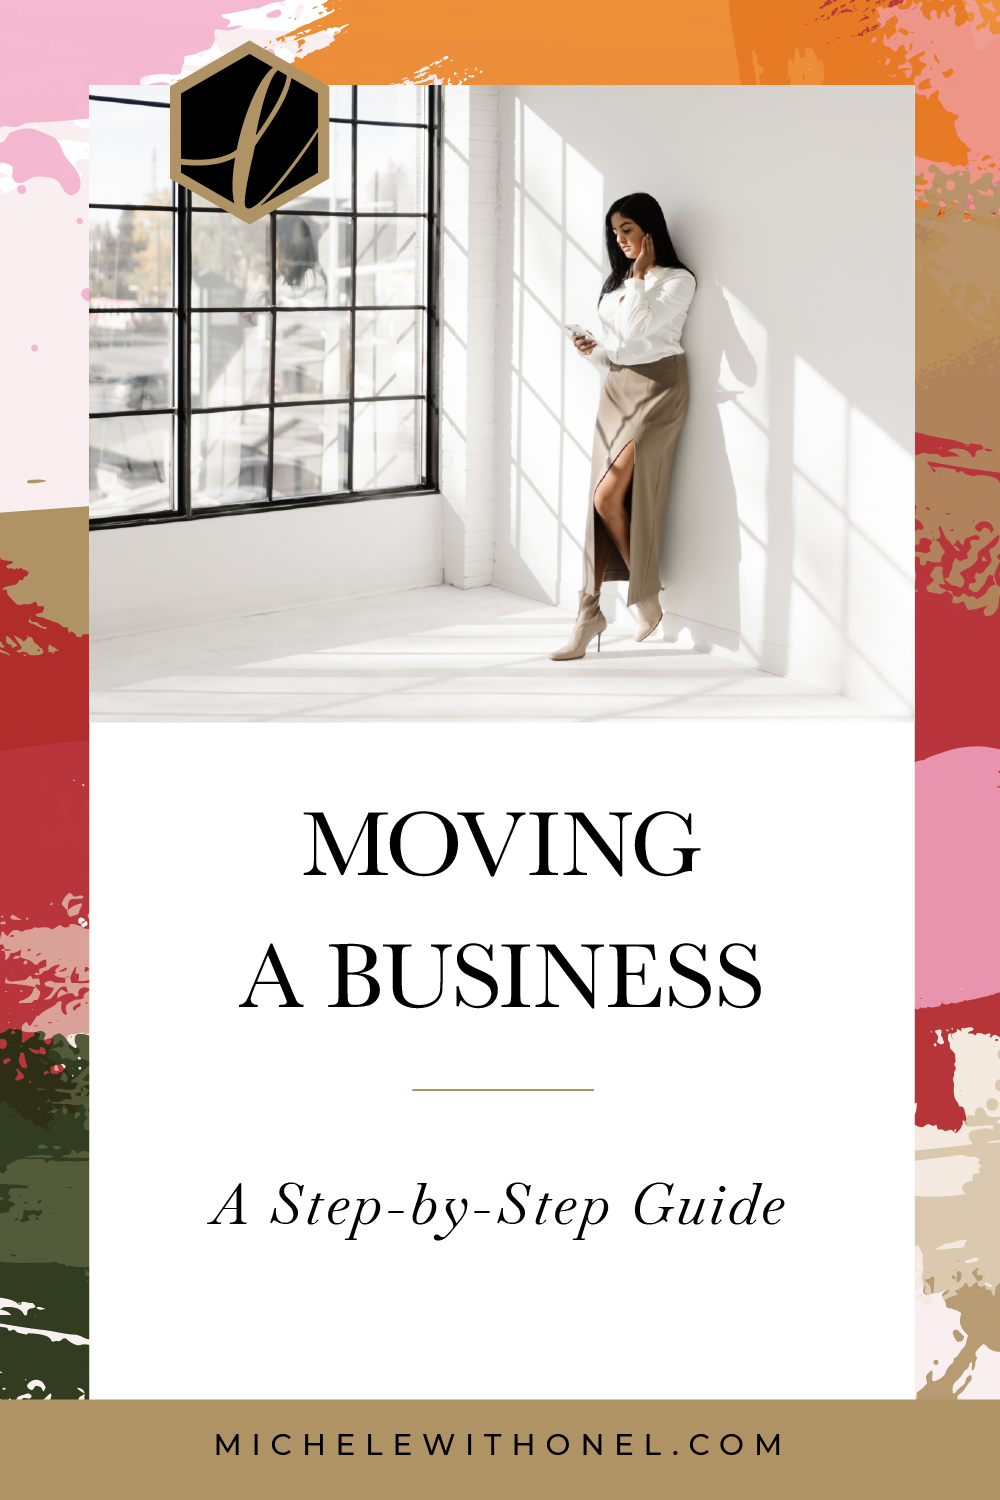 Are you relocating a business (or planning on it and need to know how)? This post is for you! Learn what it takes to move your biz to a new state in my step-by-step guide—including business relocation advice and tips on how to relocate and reopen a business. #relocating #business #branding #moving